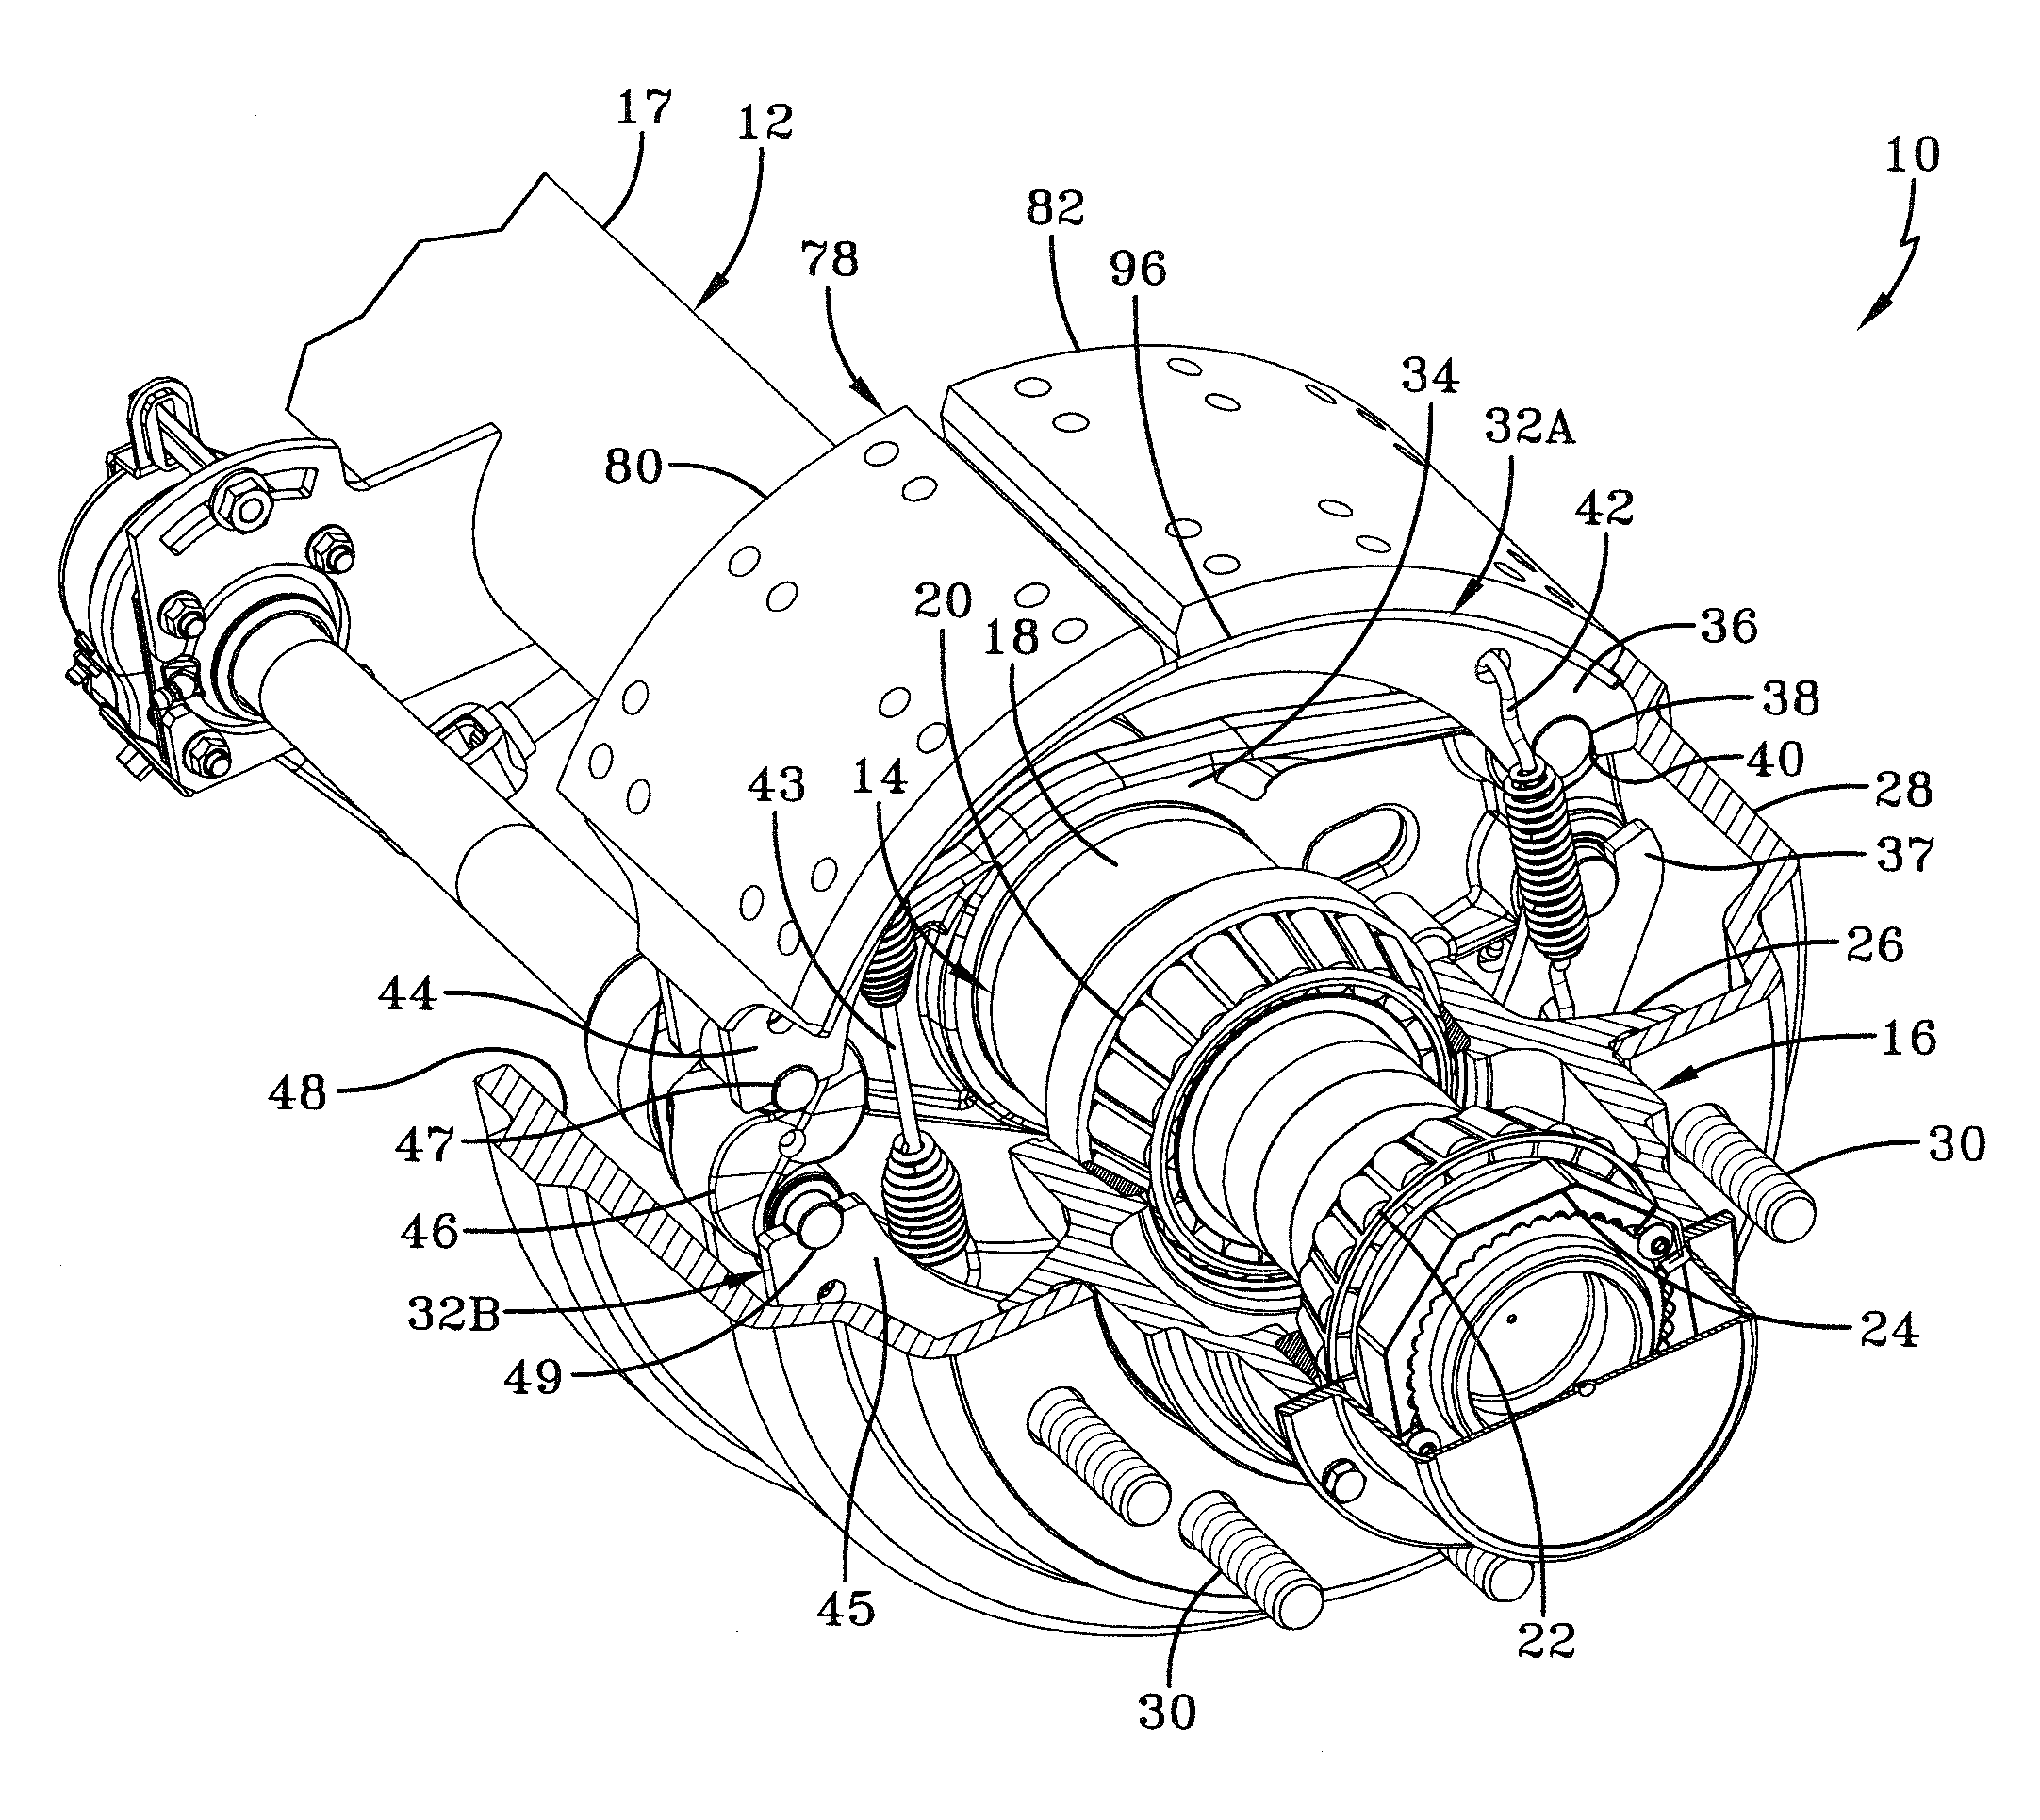 Heavy-duty vehicle brake assembly with sealing interface